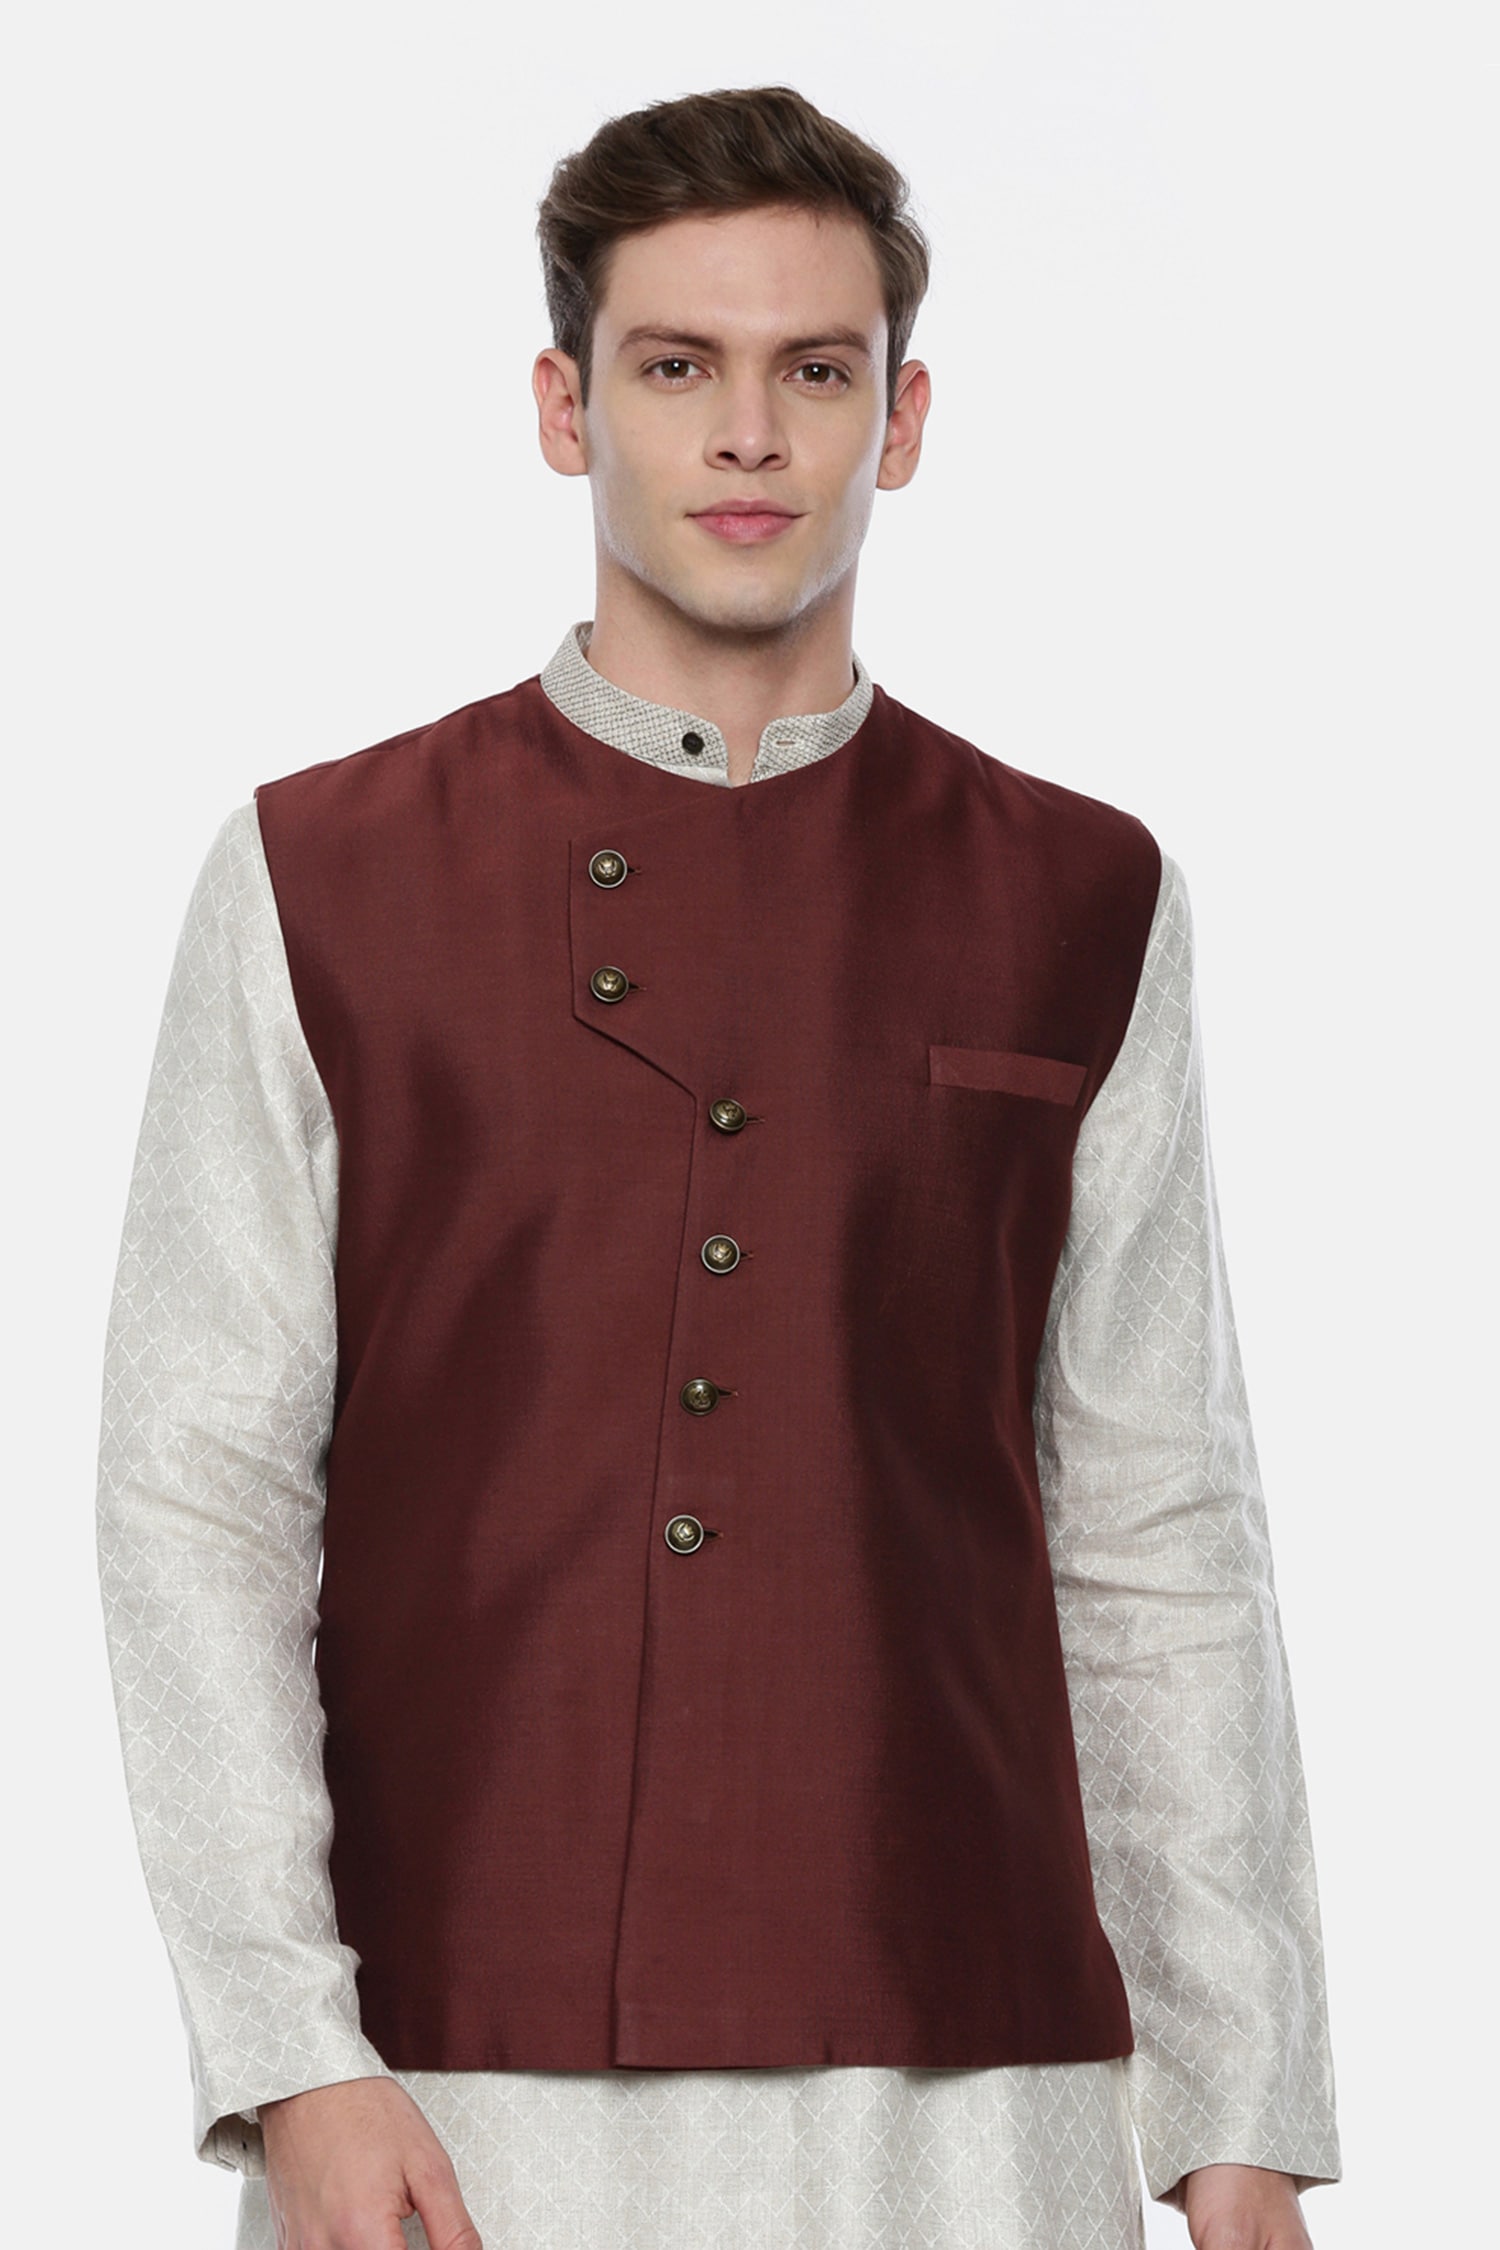 Buy Gray Solid Men Nehru Party Wear Jacket Cotton Wool for Best Price,  Reviews, Free Shipping